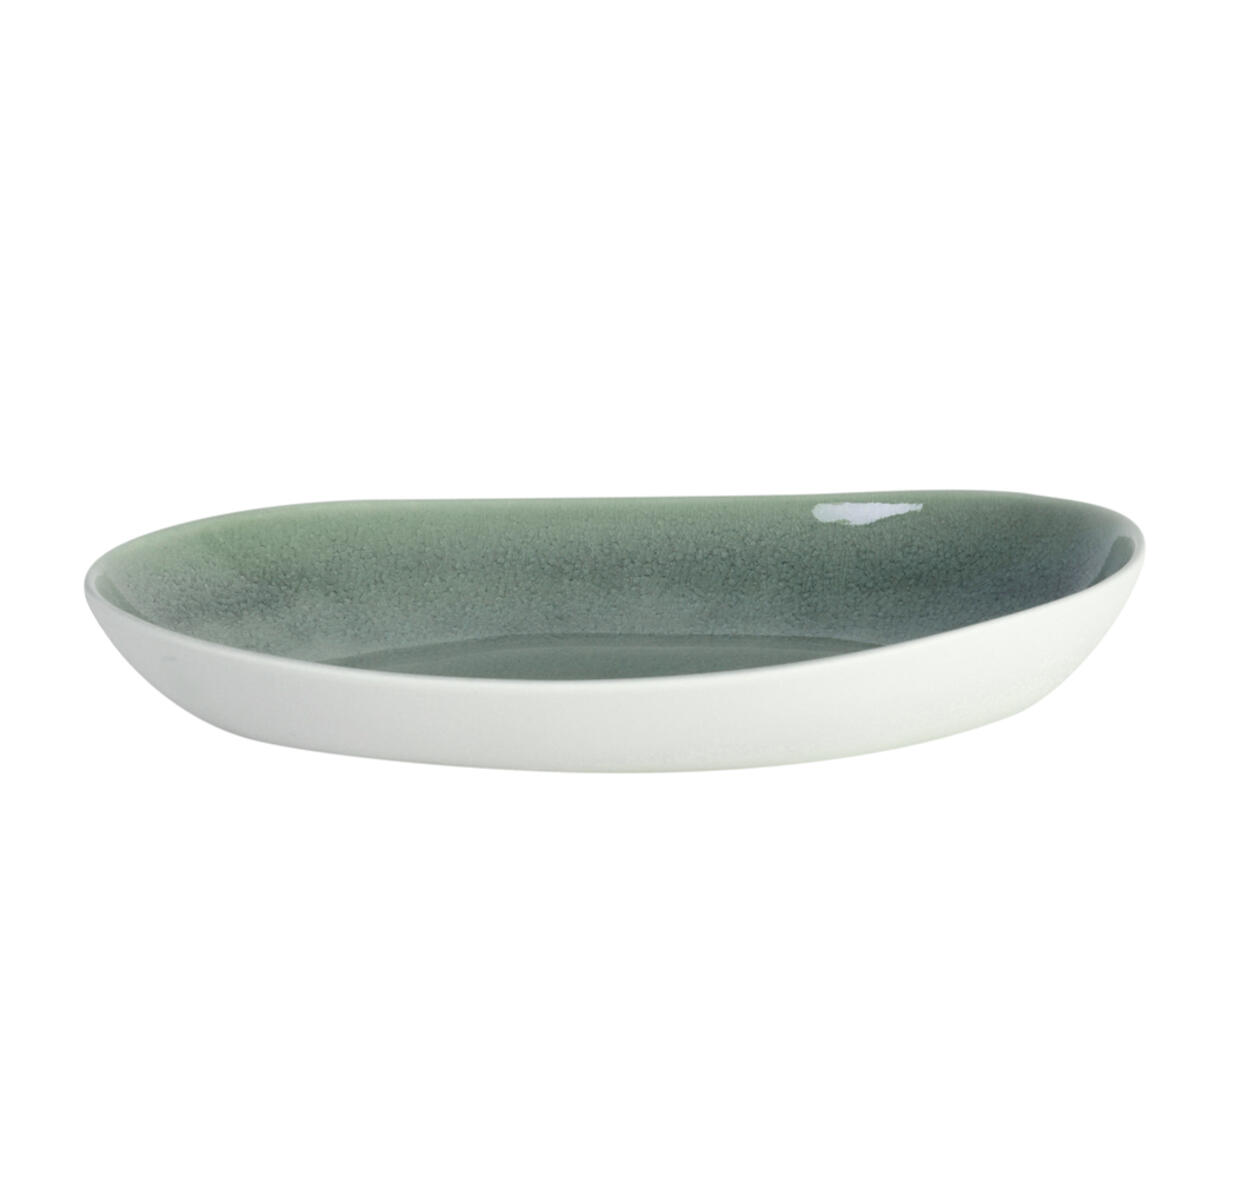 oval dish maguelone cachemire ceramic manufacturer